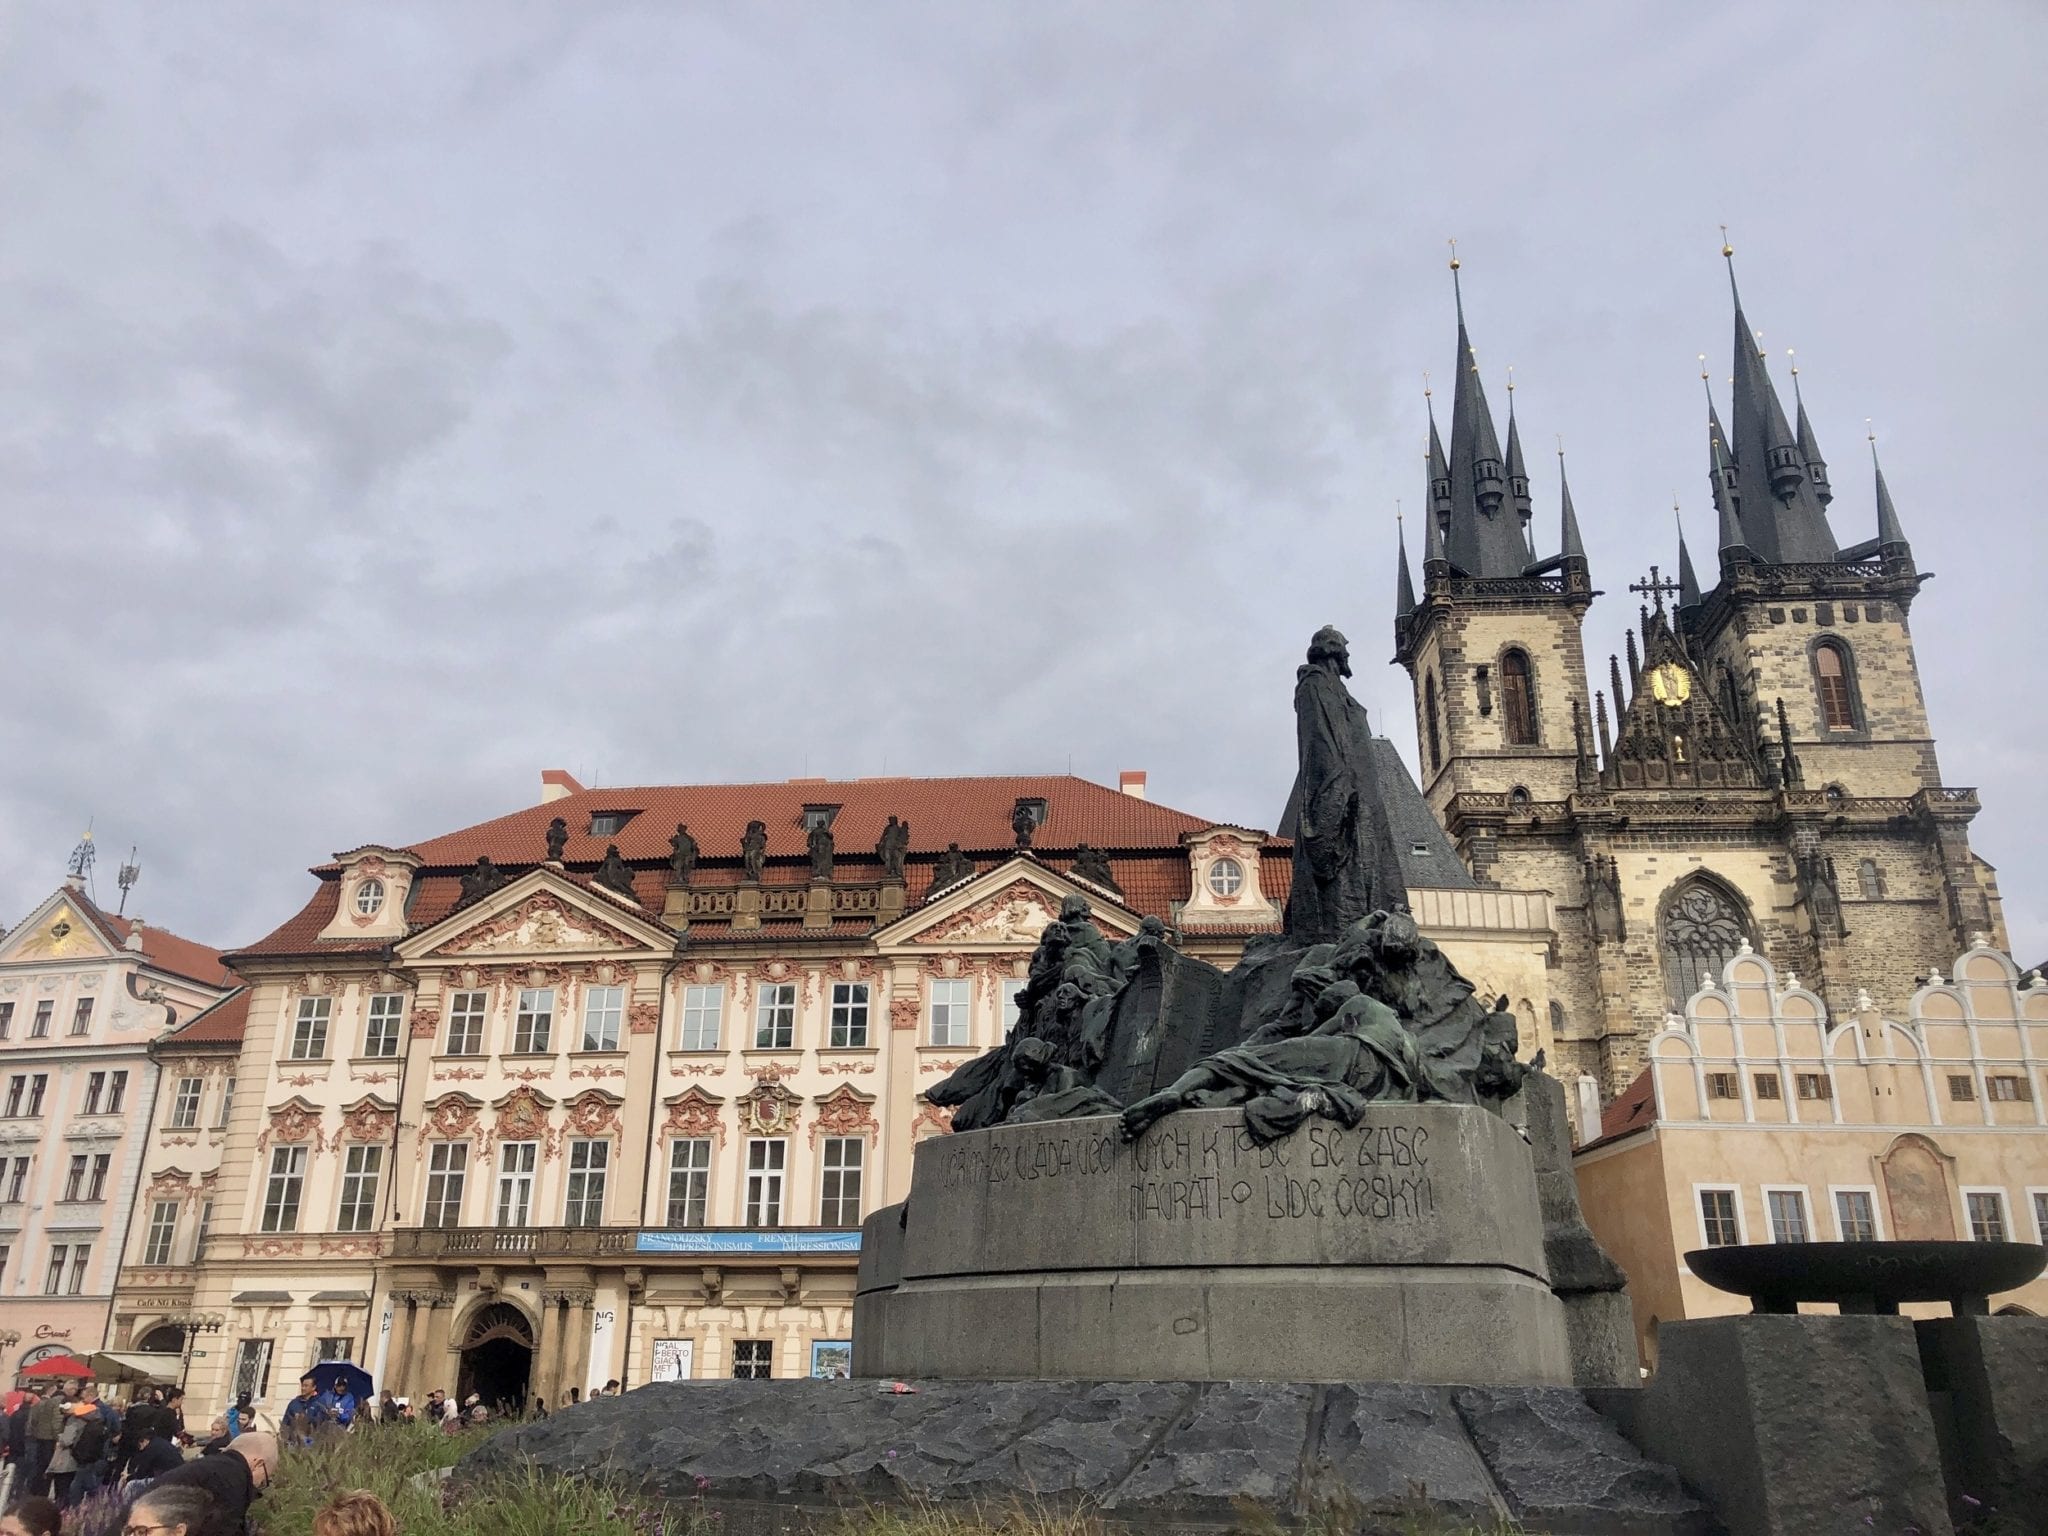 A scene from Old Town Square in Prague: a statue of soldiers in front of a cream-colored building with an orange roof and two church towers. Shot from below because THIS SQUARE IS FULL OF THOUSANDS OF TOURISTS.